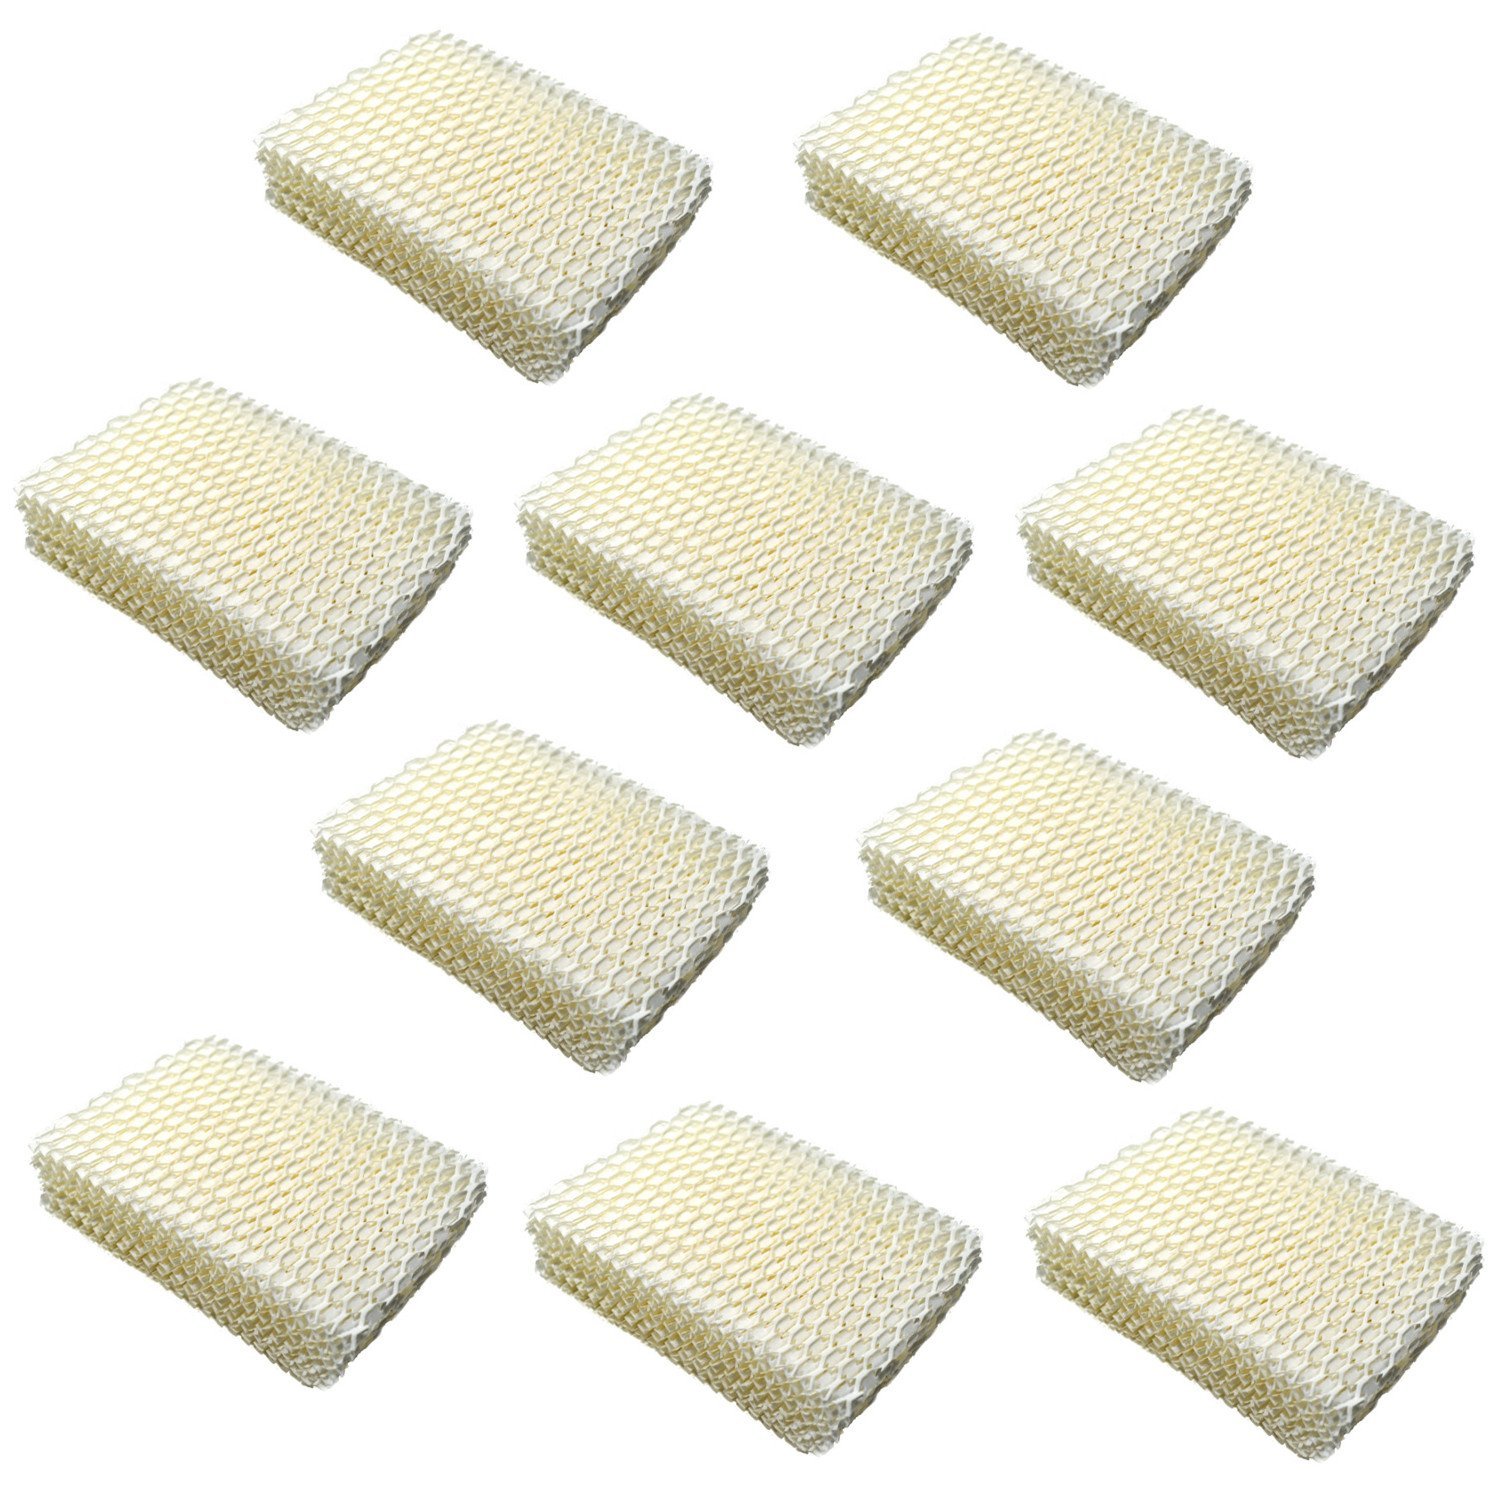 HQRP 10-pack Humidifier Wick Filter for Relion Honeywell Duracraft WF813 AC-813 AGW-813 D13-C HAC506 ACR-832 HC832 Replacement 